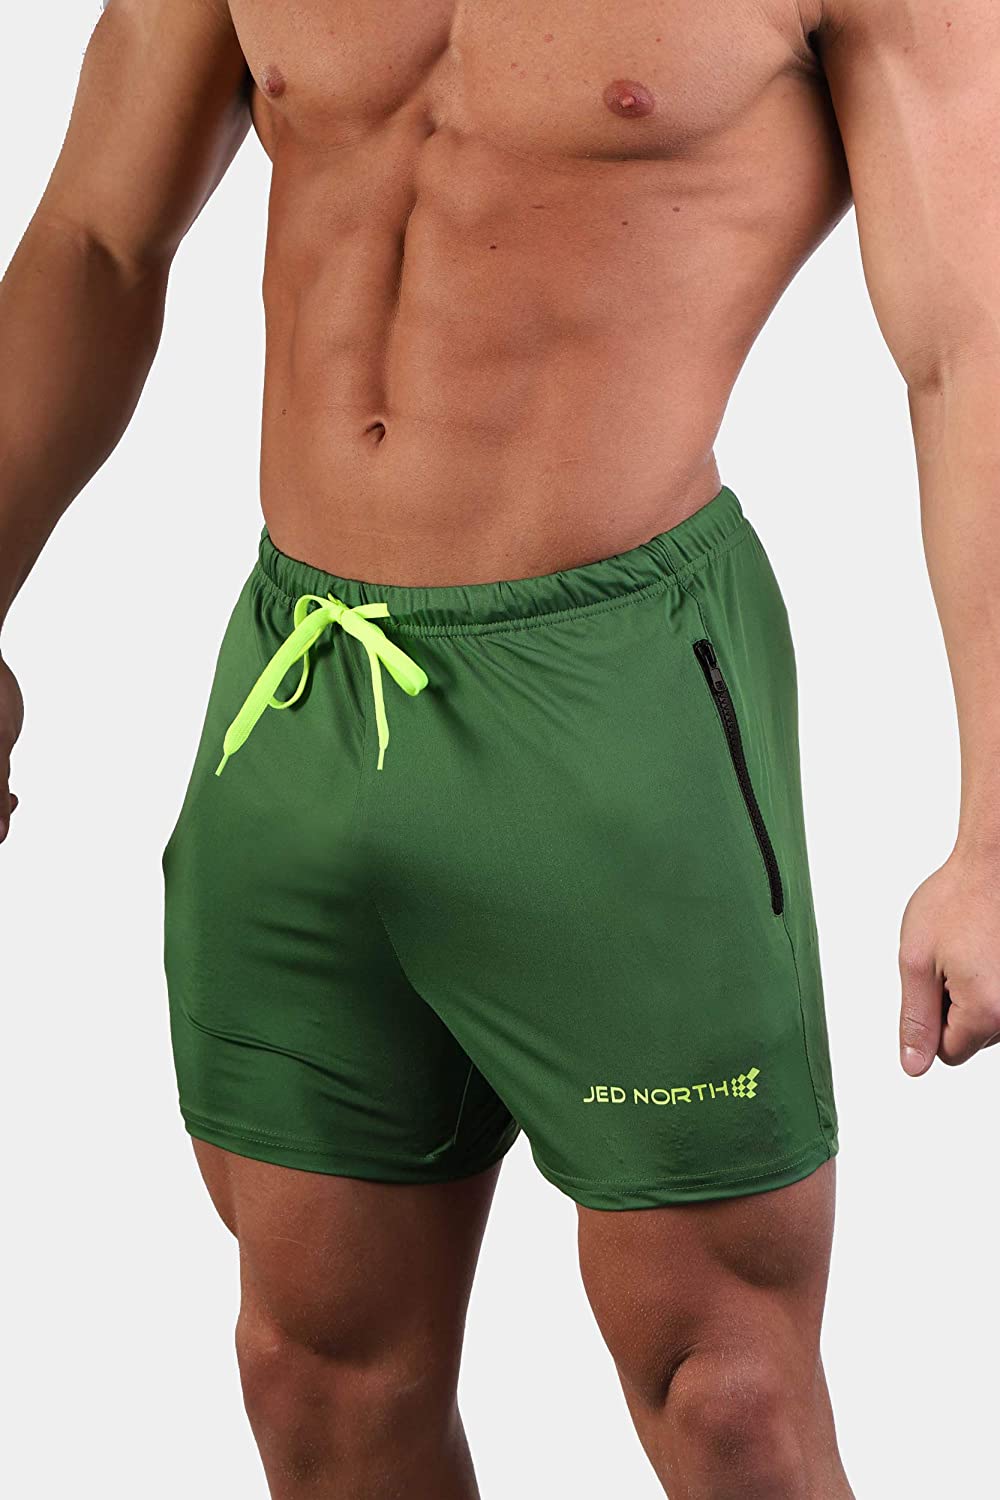 Jed North Men's Fitted Shorts Bodybuilding Workout Gym Running Tight ...